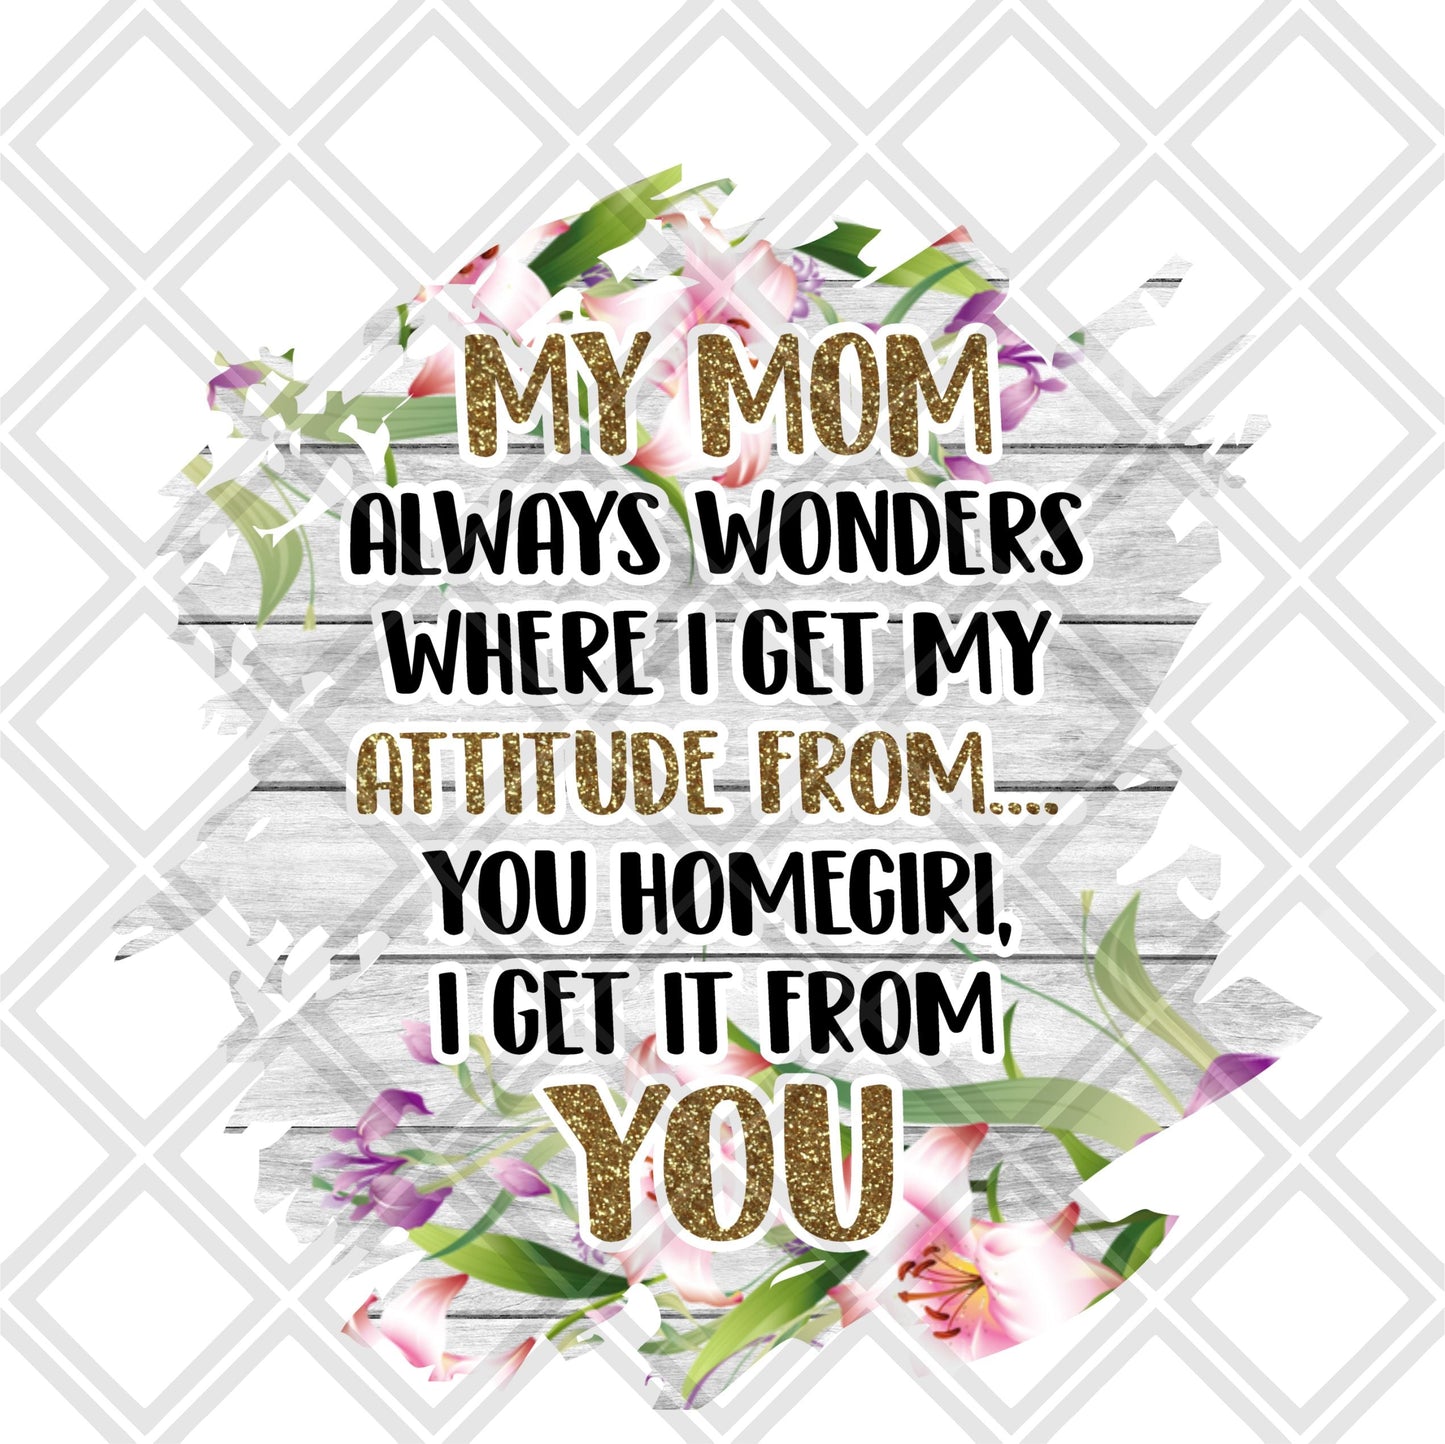 My Mom always wonders who i get my attitude from you home girl Digital Download Instand Download